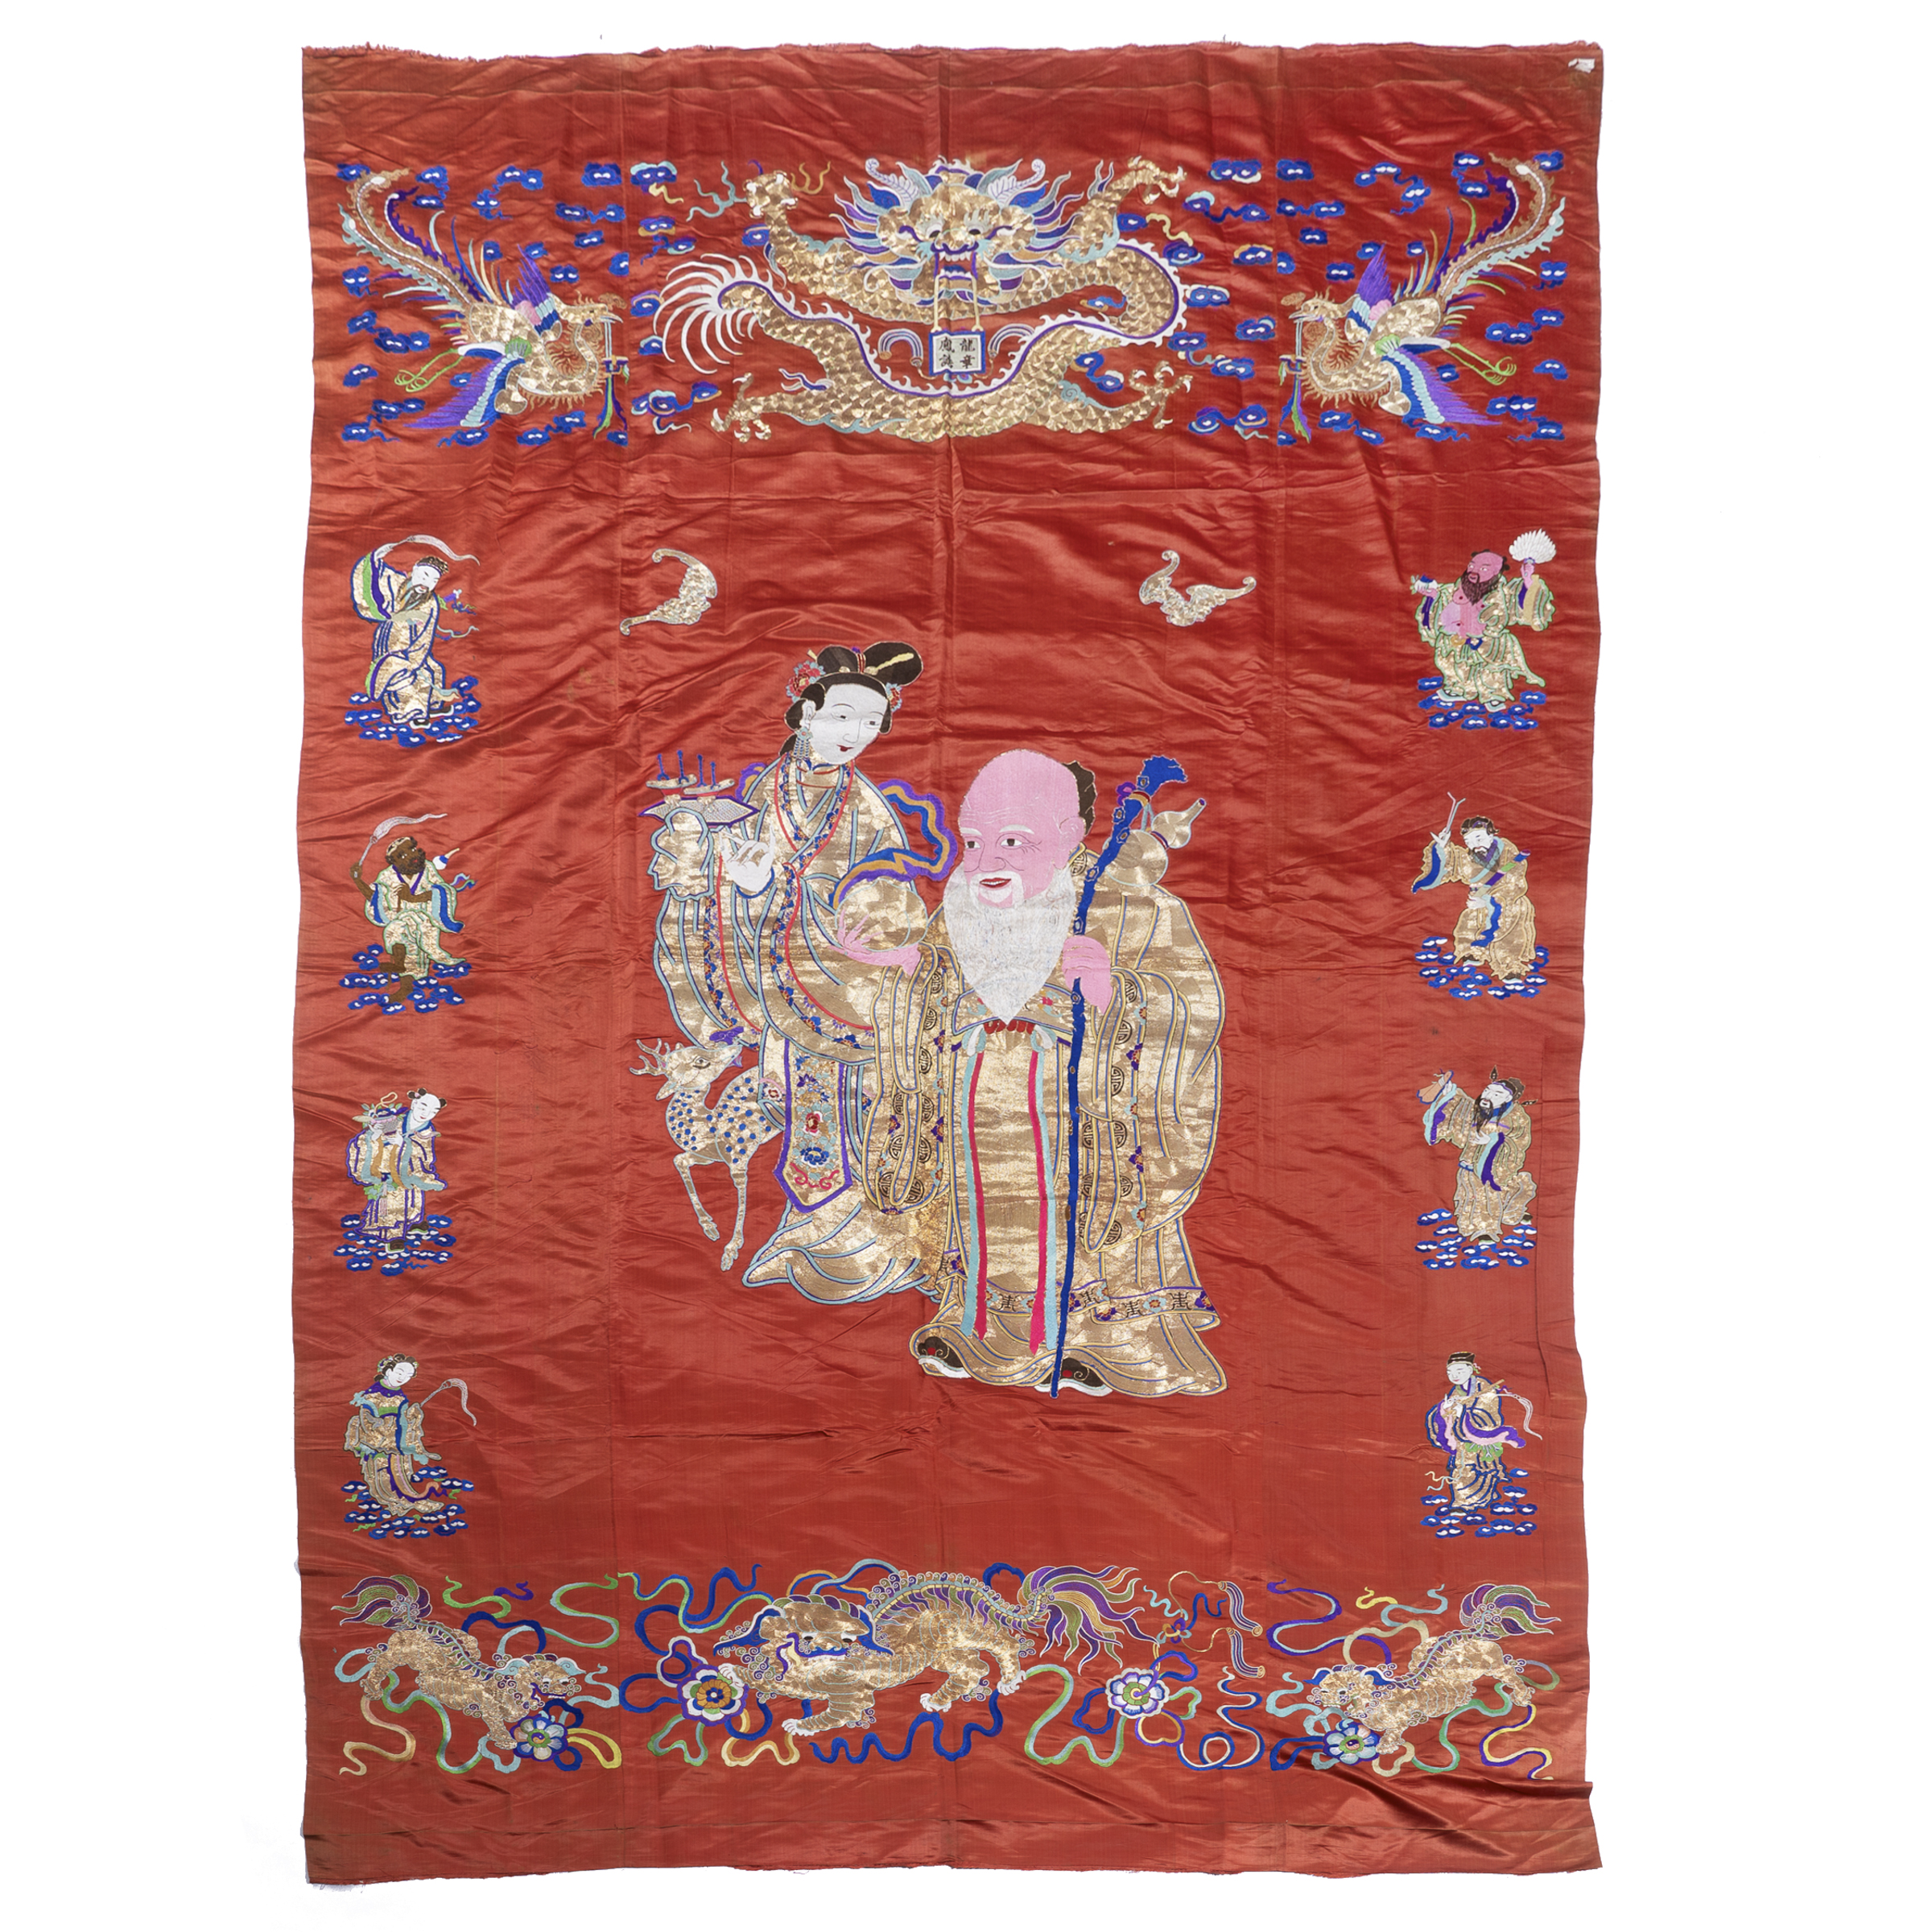 A Massive Red Ground Silk Embroidery with Daoist Deities, Early 20th Century